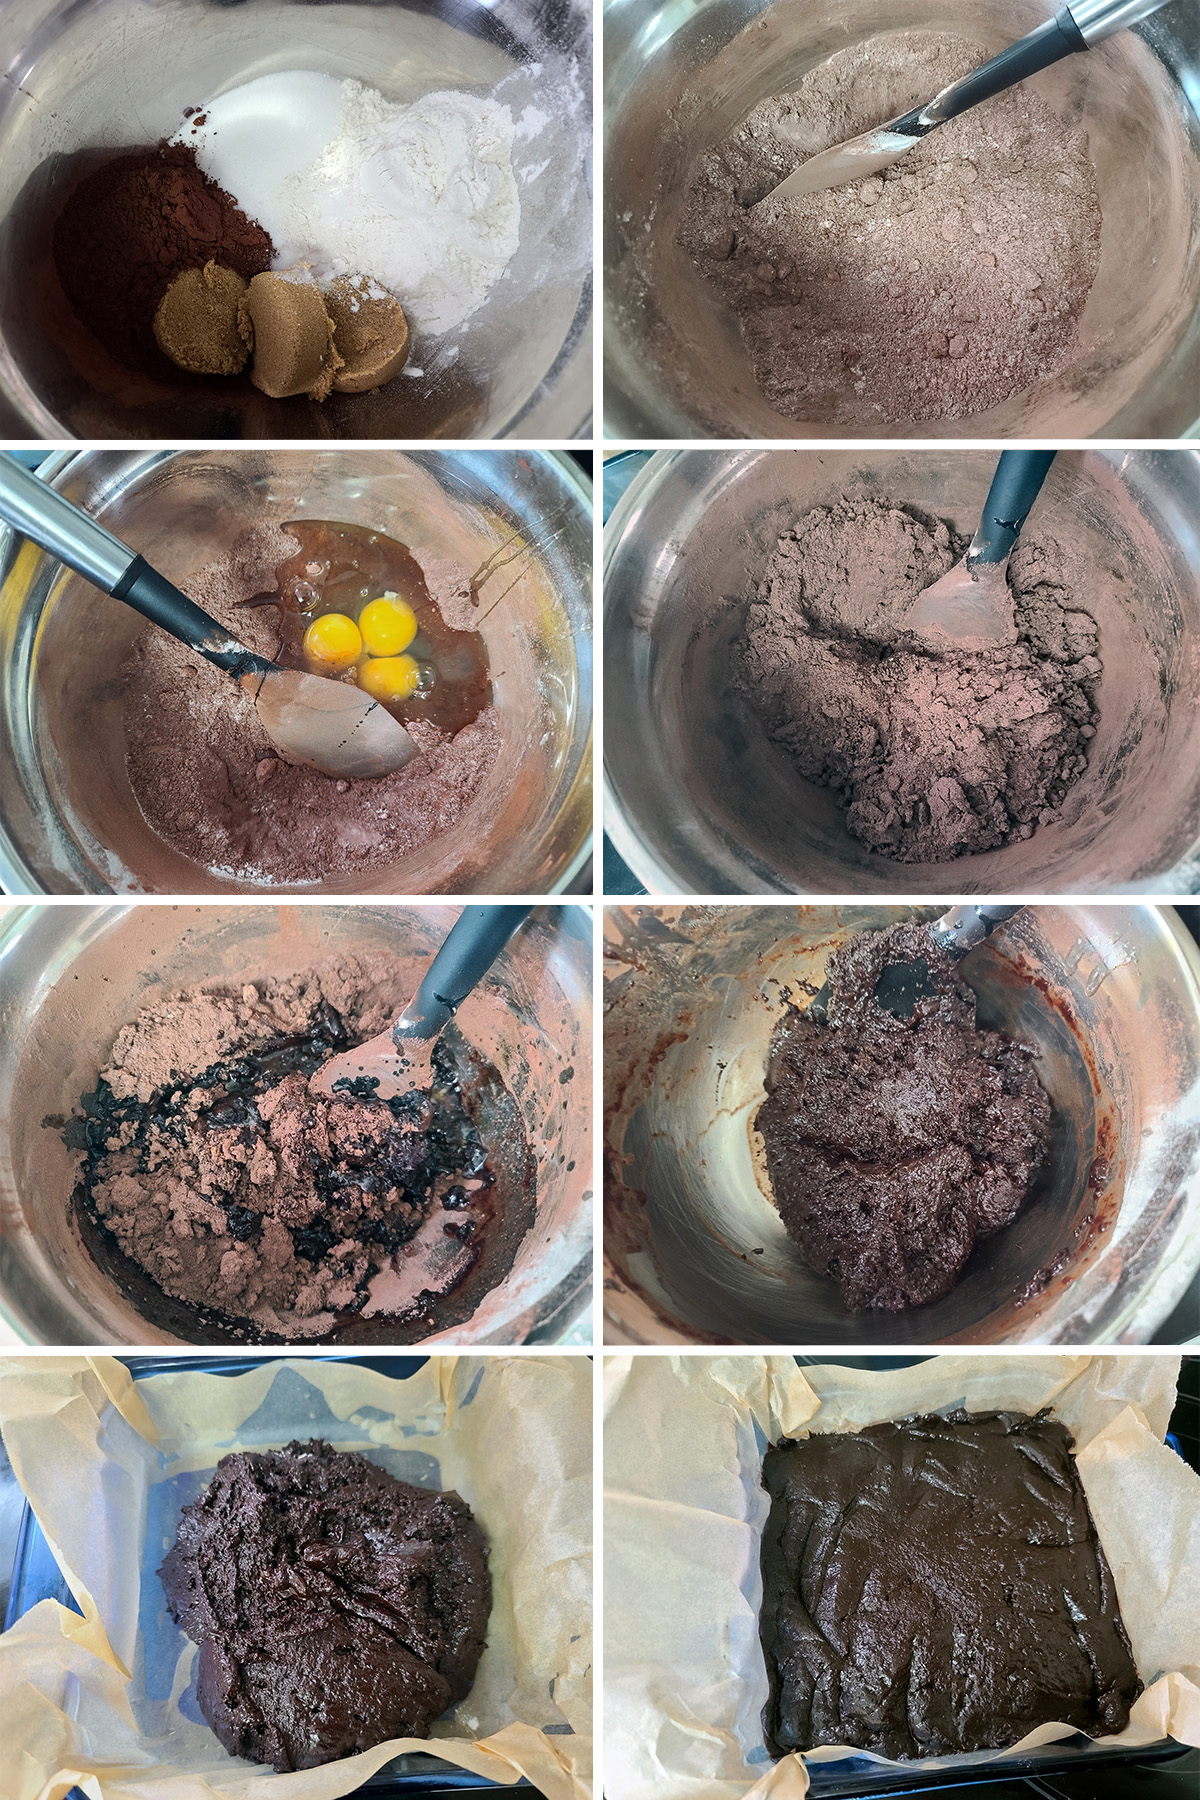 An 8 part image showing the brownie batter being mixed and spread in a baking pan.